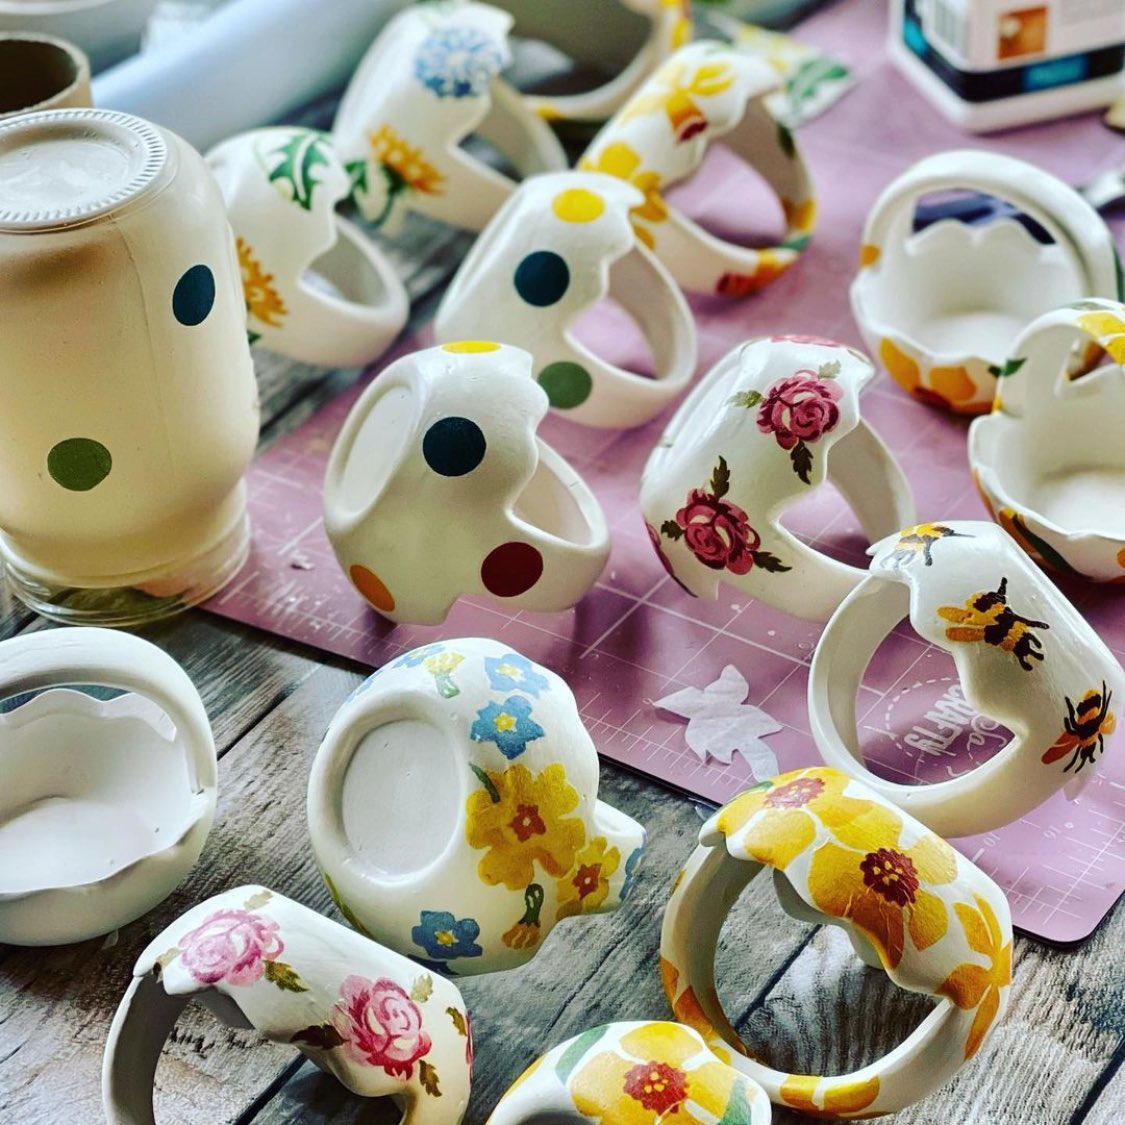 Today is the last day to order for Easter. Check out my Etsy store to order. Link in bio #etsygifts #emmabridgewateraddict
#emmabridgewater